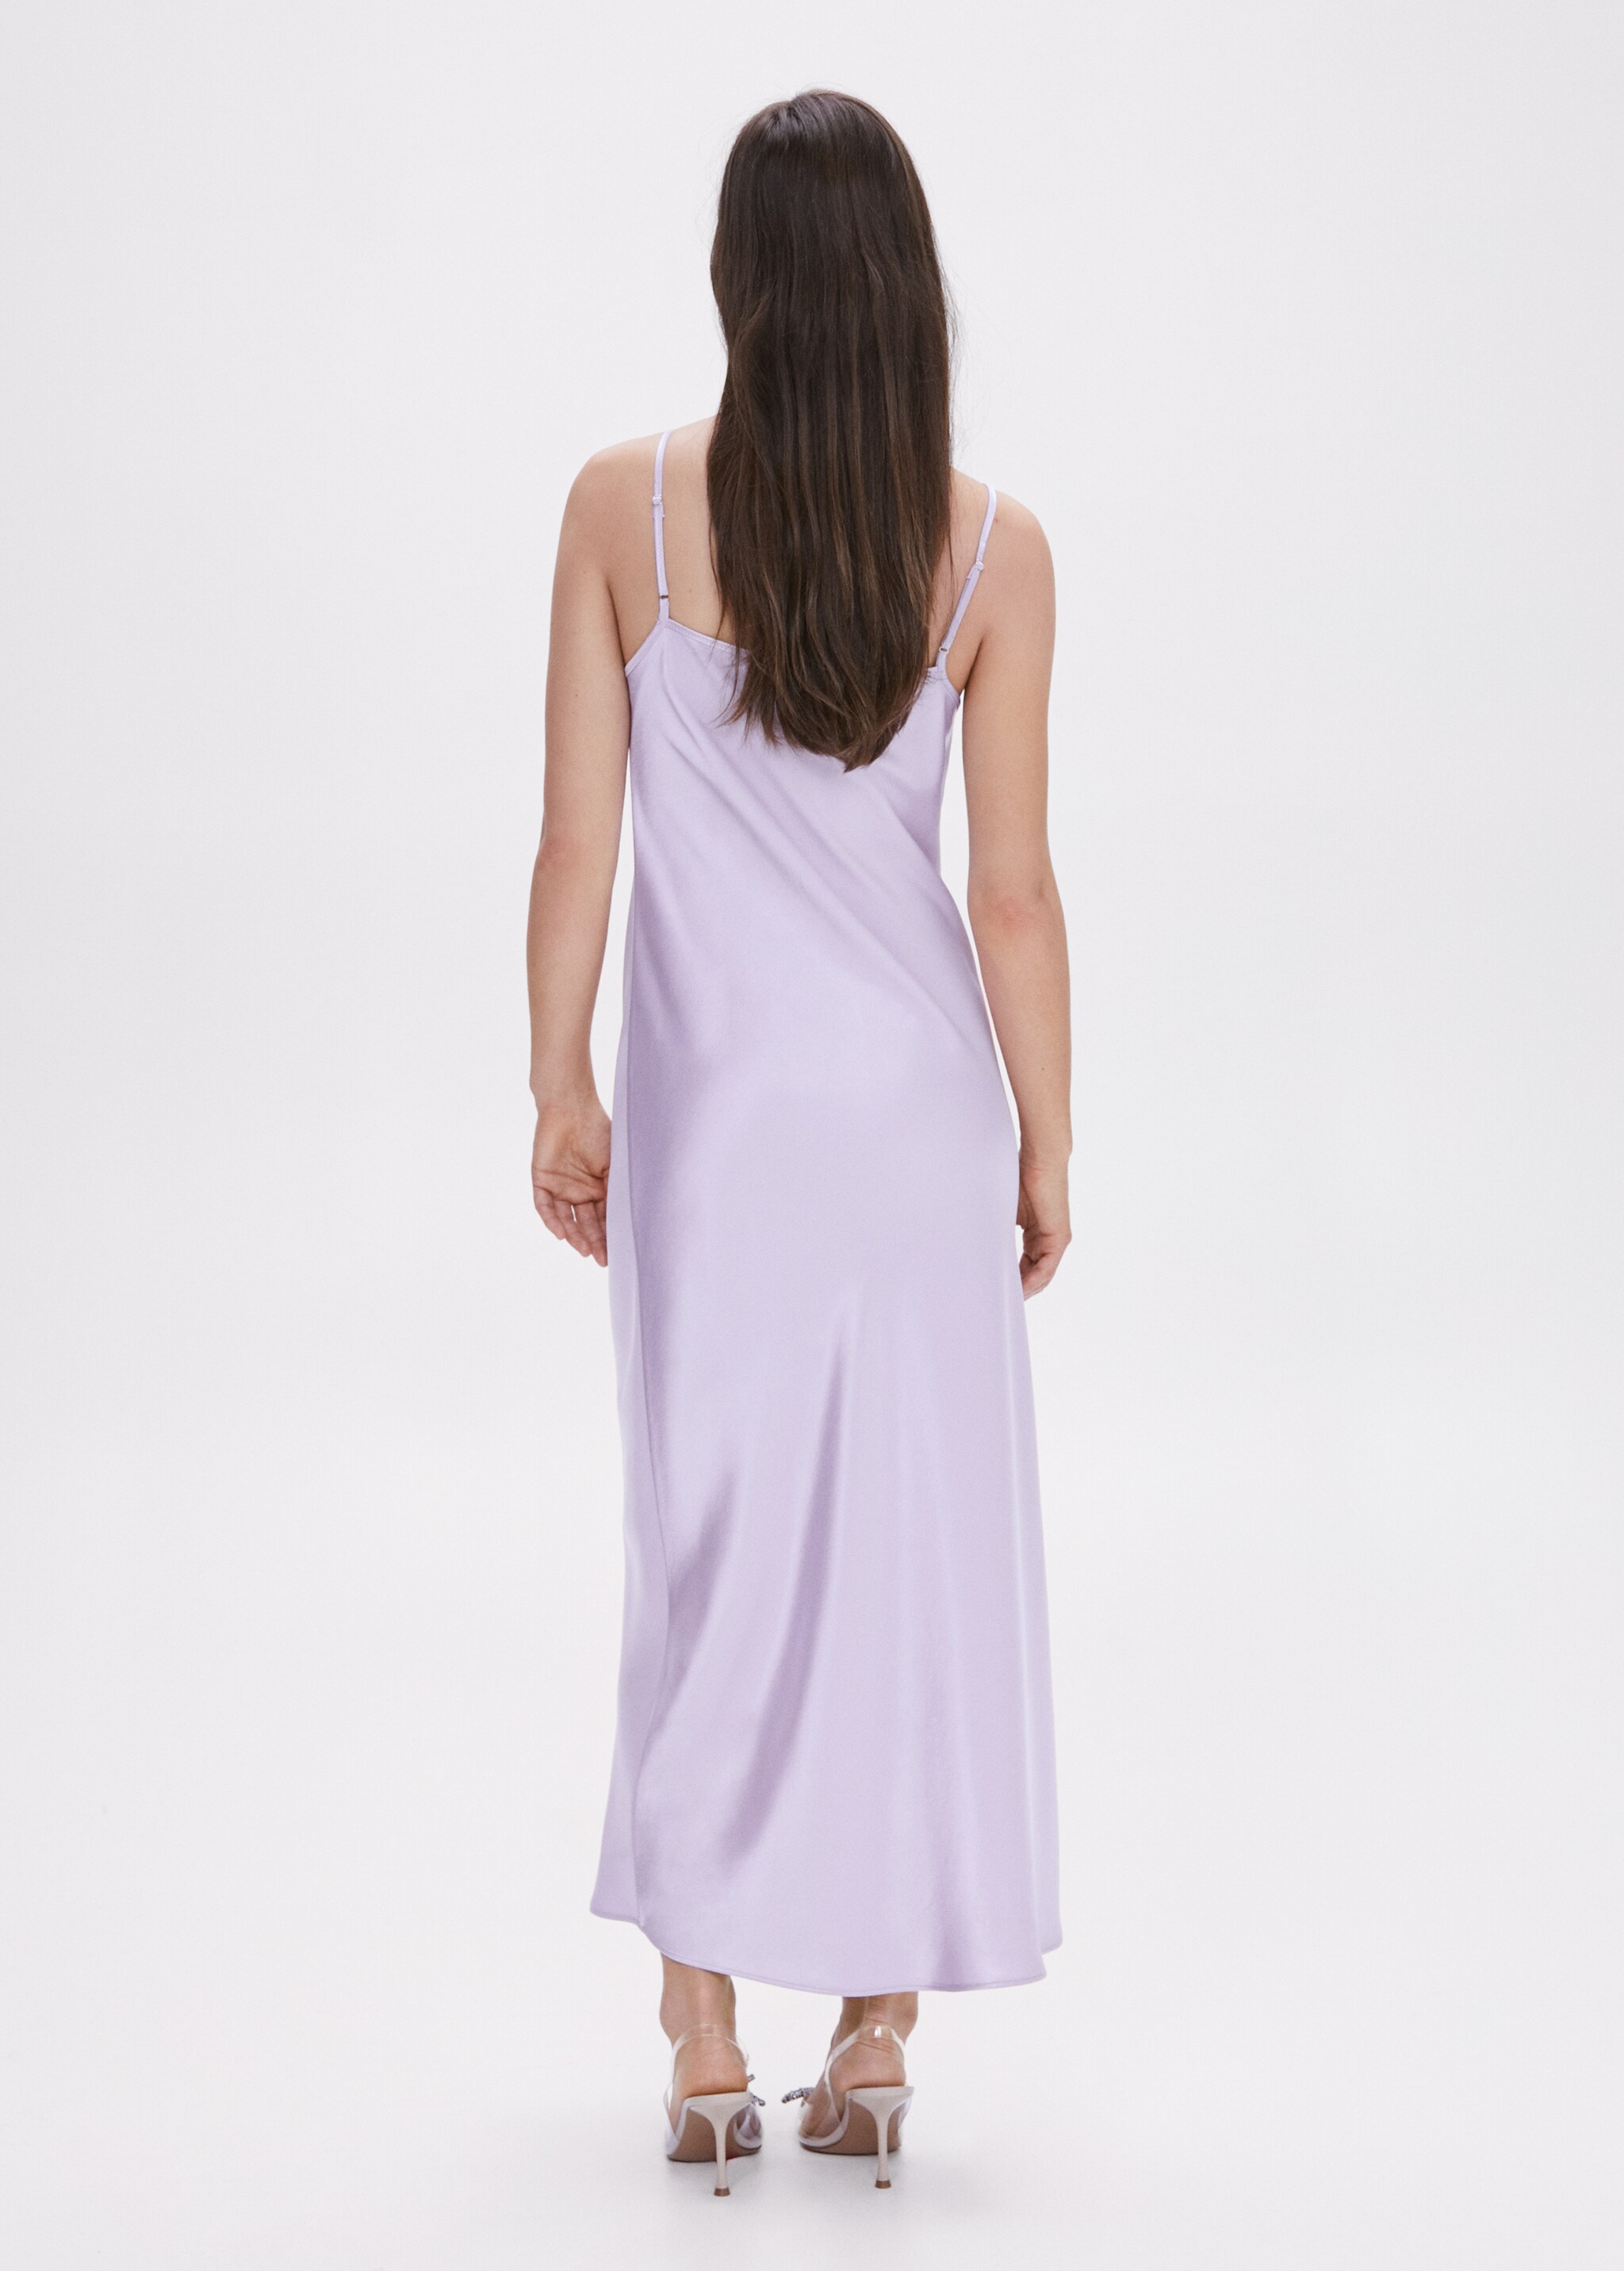 Satin camisole dress - Reverse of the article